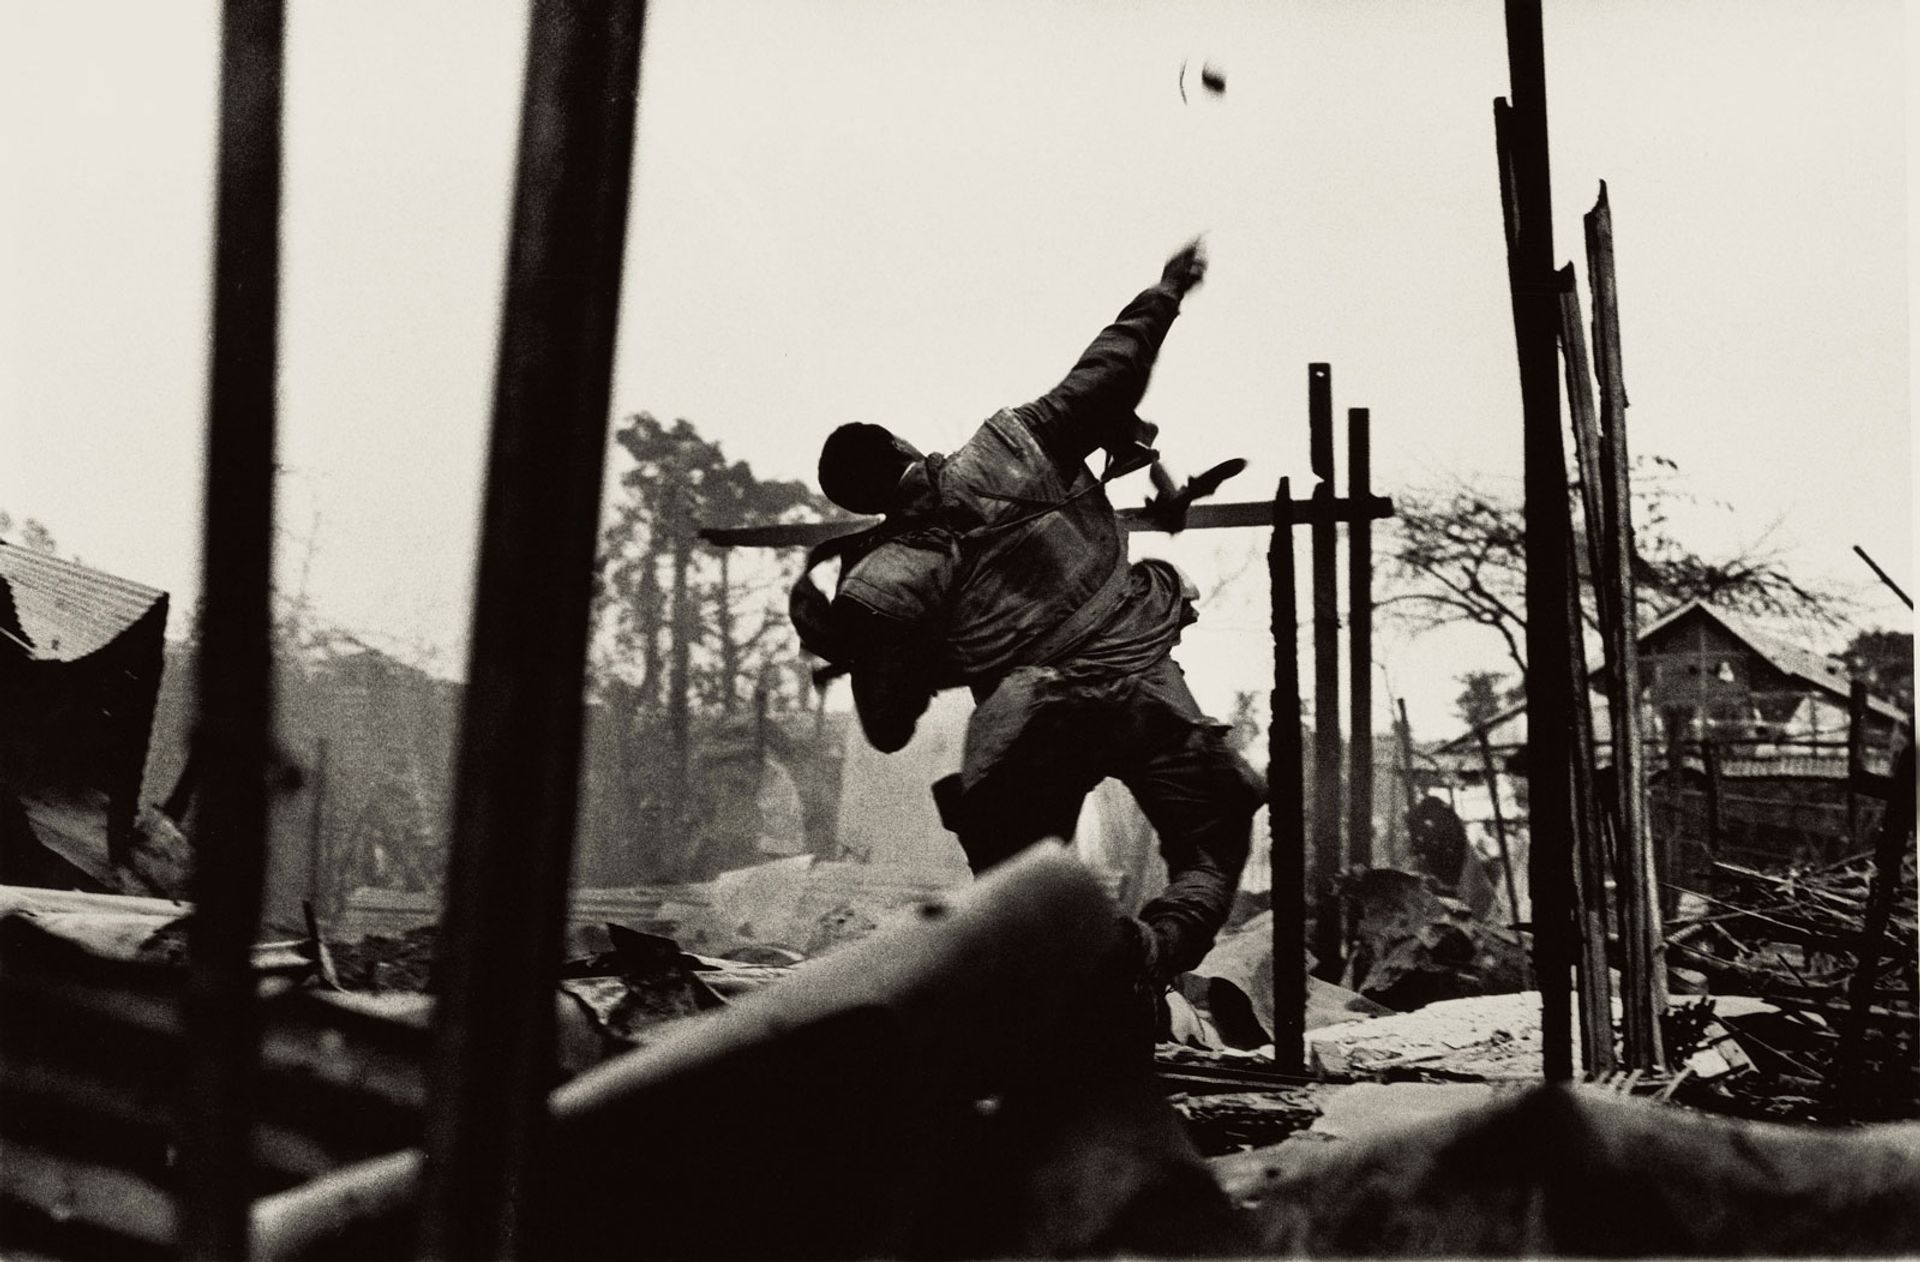 Grenade Thrower, Hue, Vietnam (1968) by Don McCullin is on show at Tate Britain © Courtesy of Don McCullin